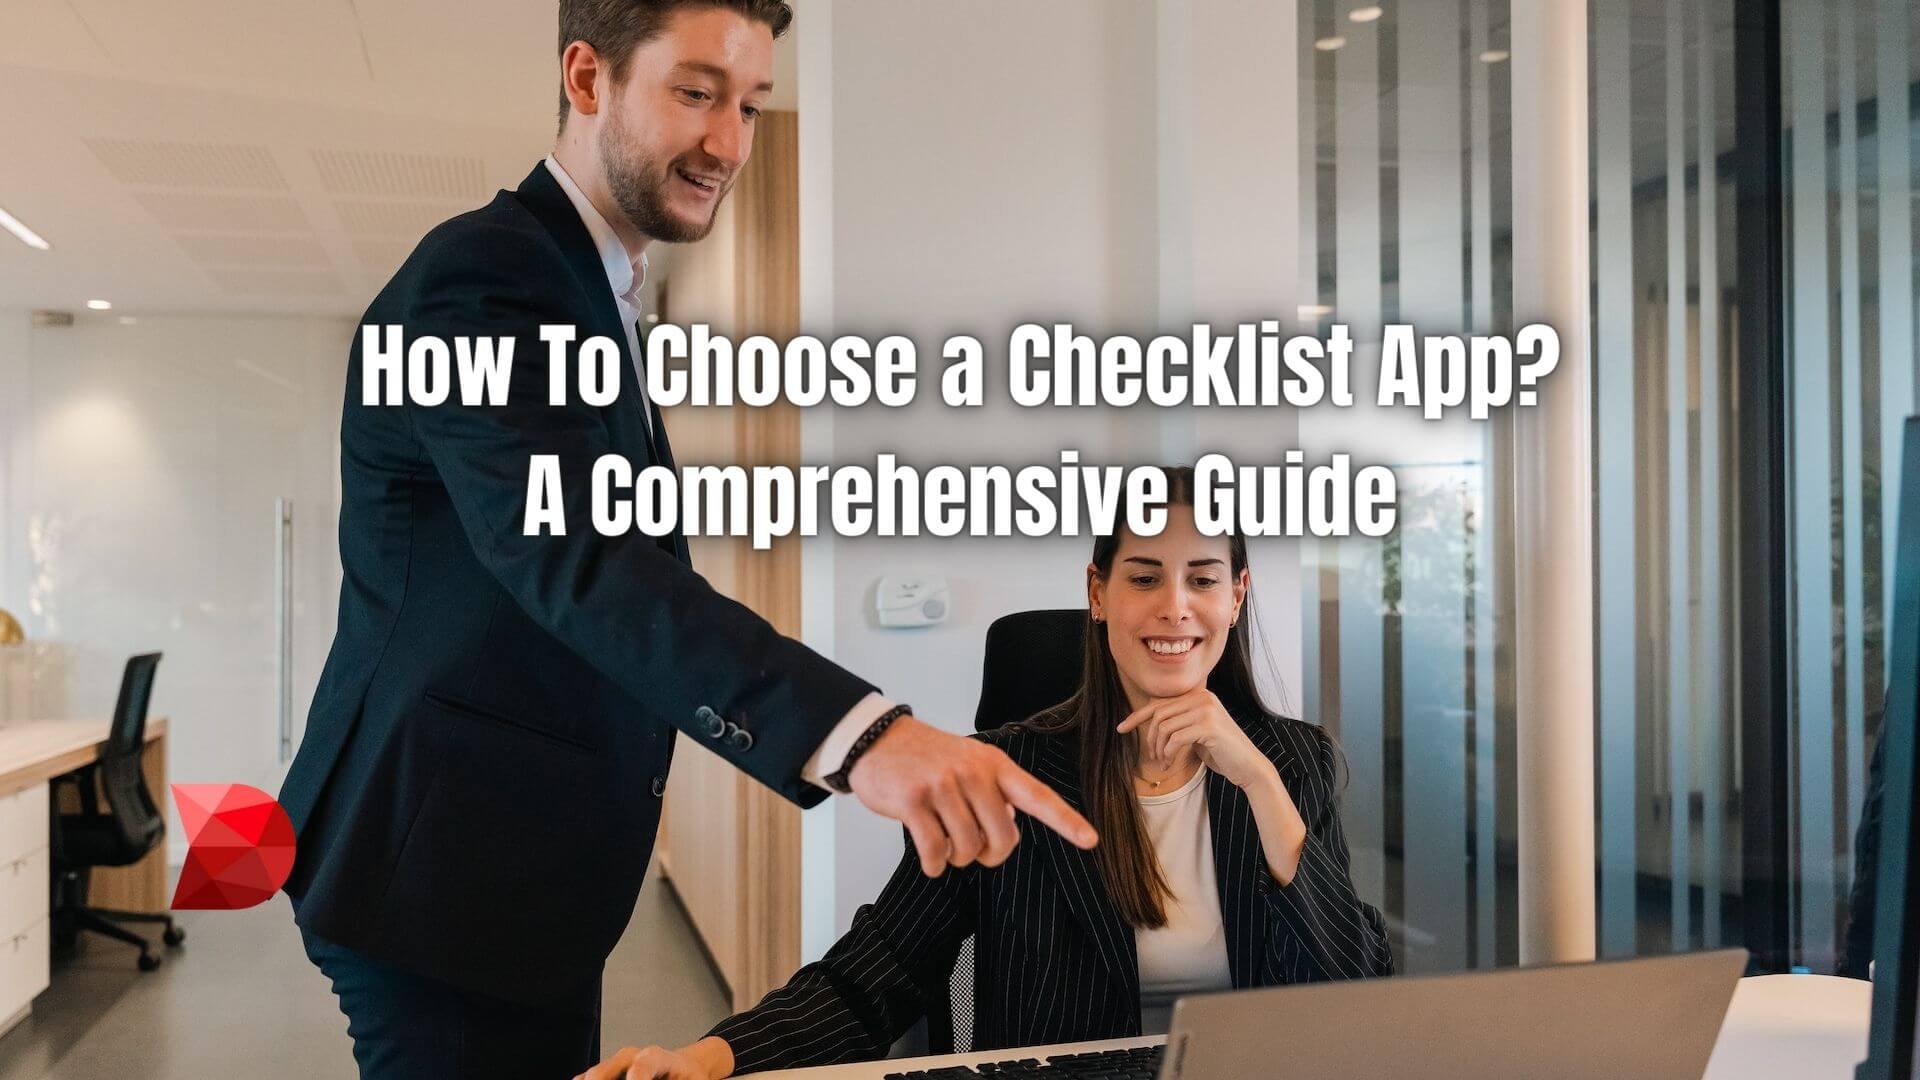 We're going to discuss how to choose a checklist app and share some of our top picks for you to try. Read here to learn more.